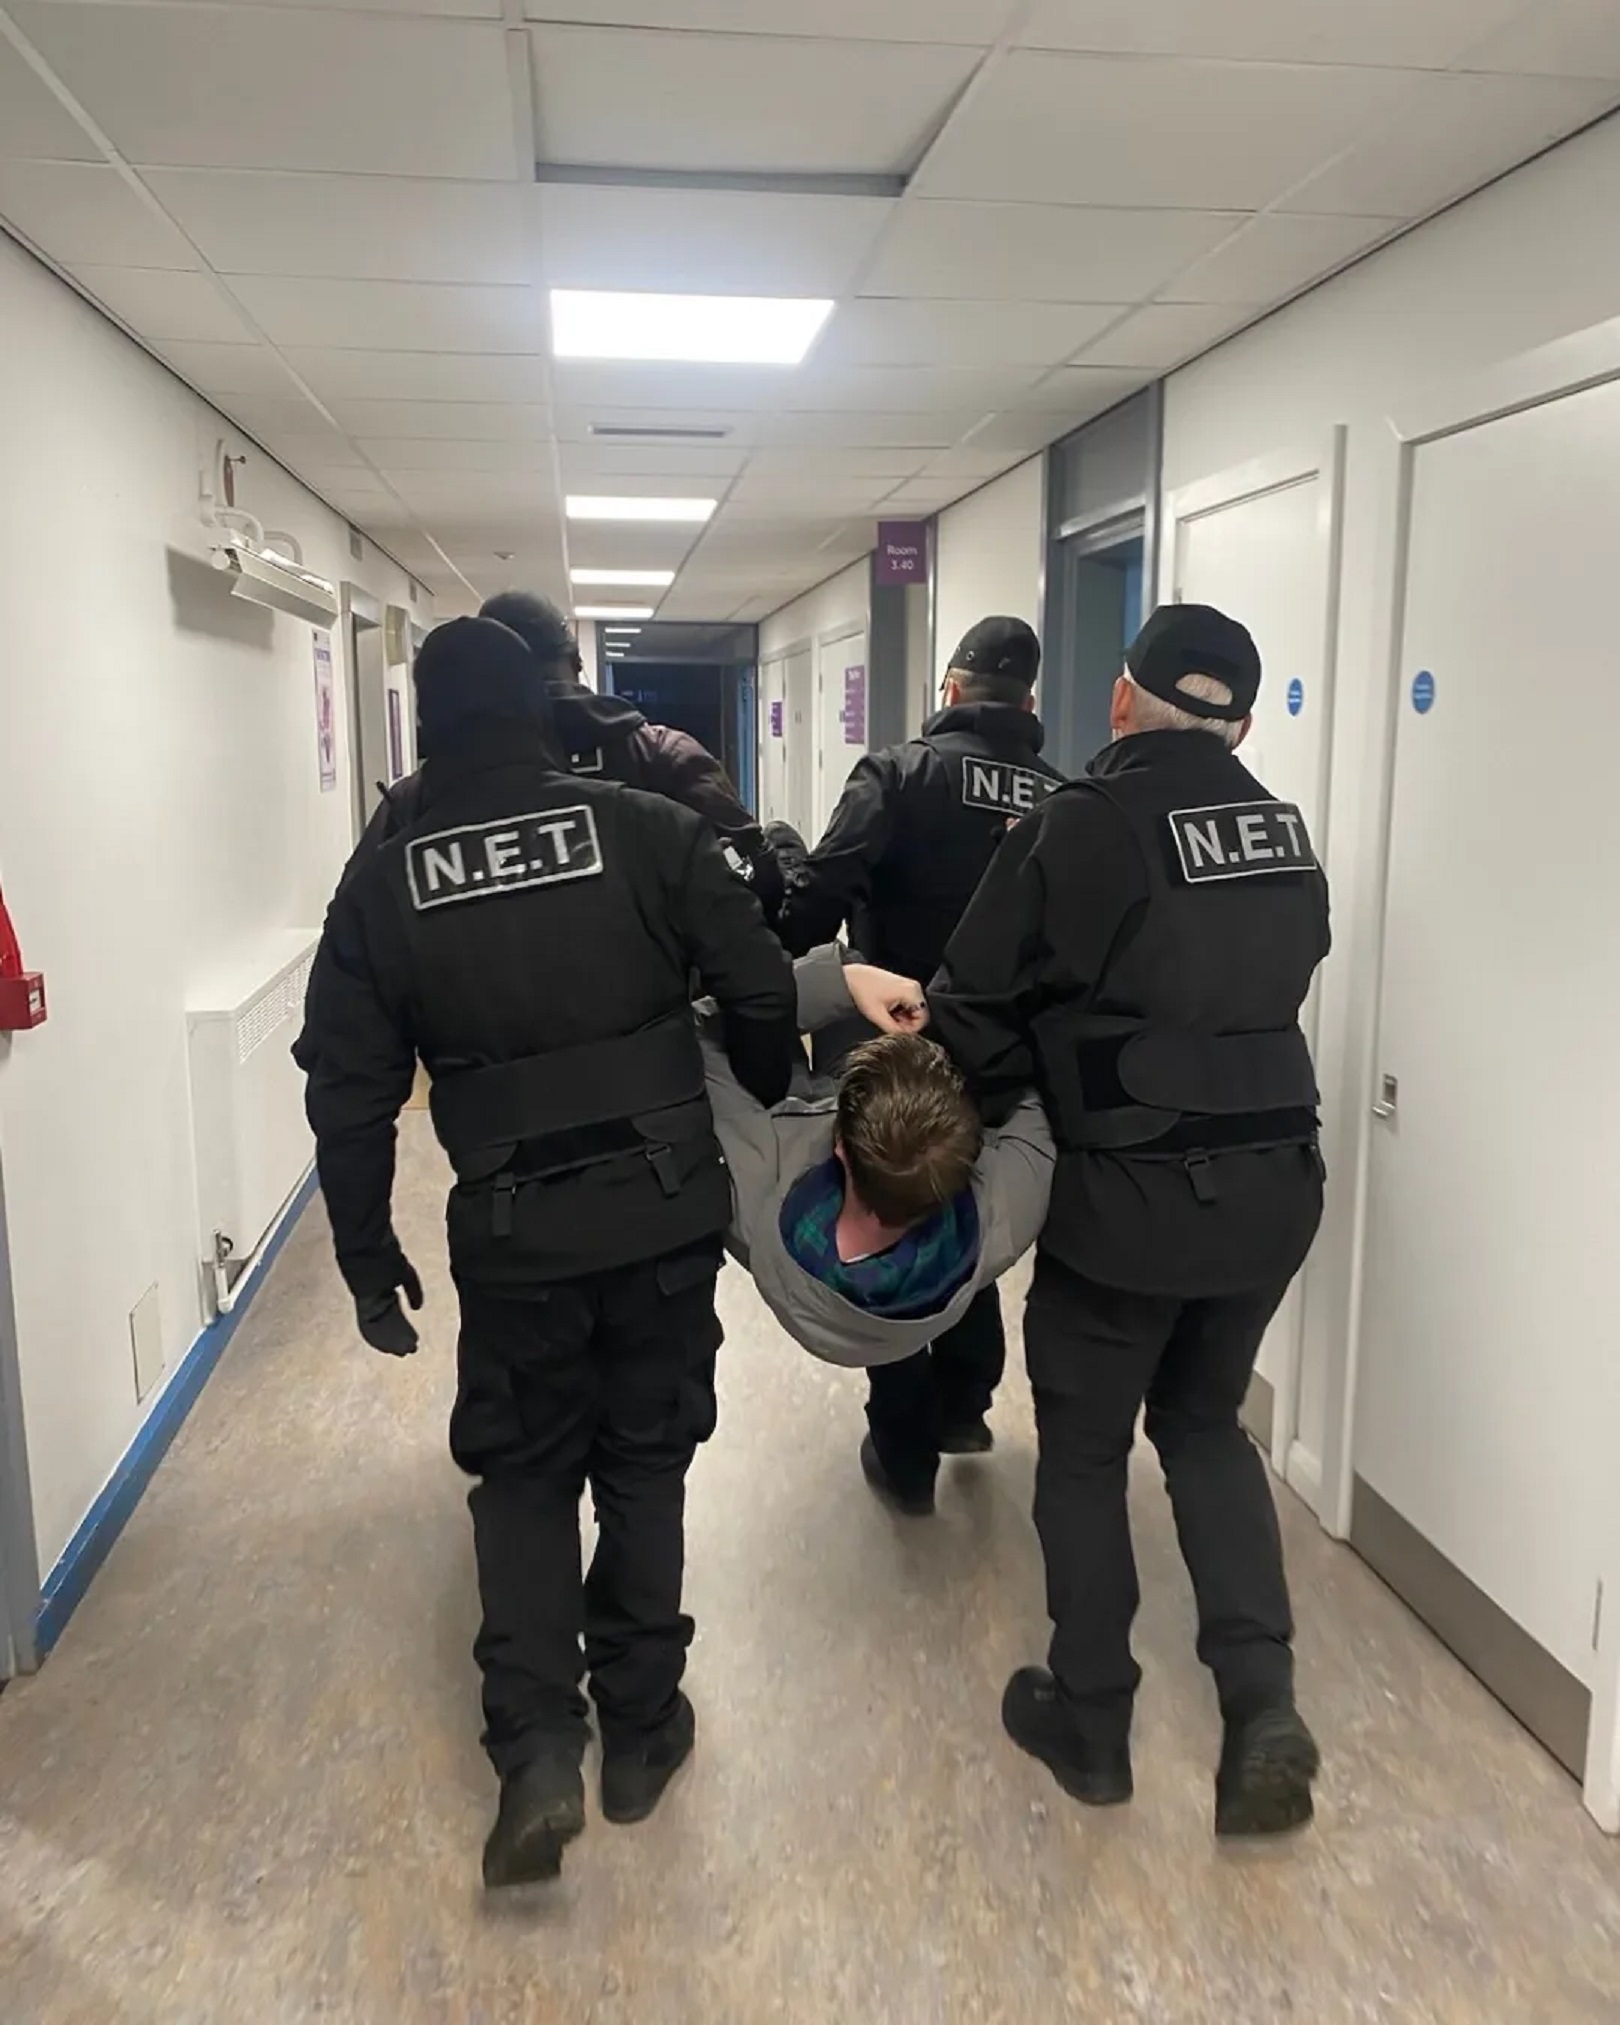 The UoM Rent Strike 2023 group said that at around 5.20am on Wednesday a group of bailiffs entered the Simon Building and 'began forcefully removing student occupiers'